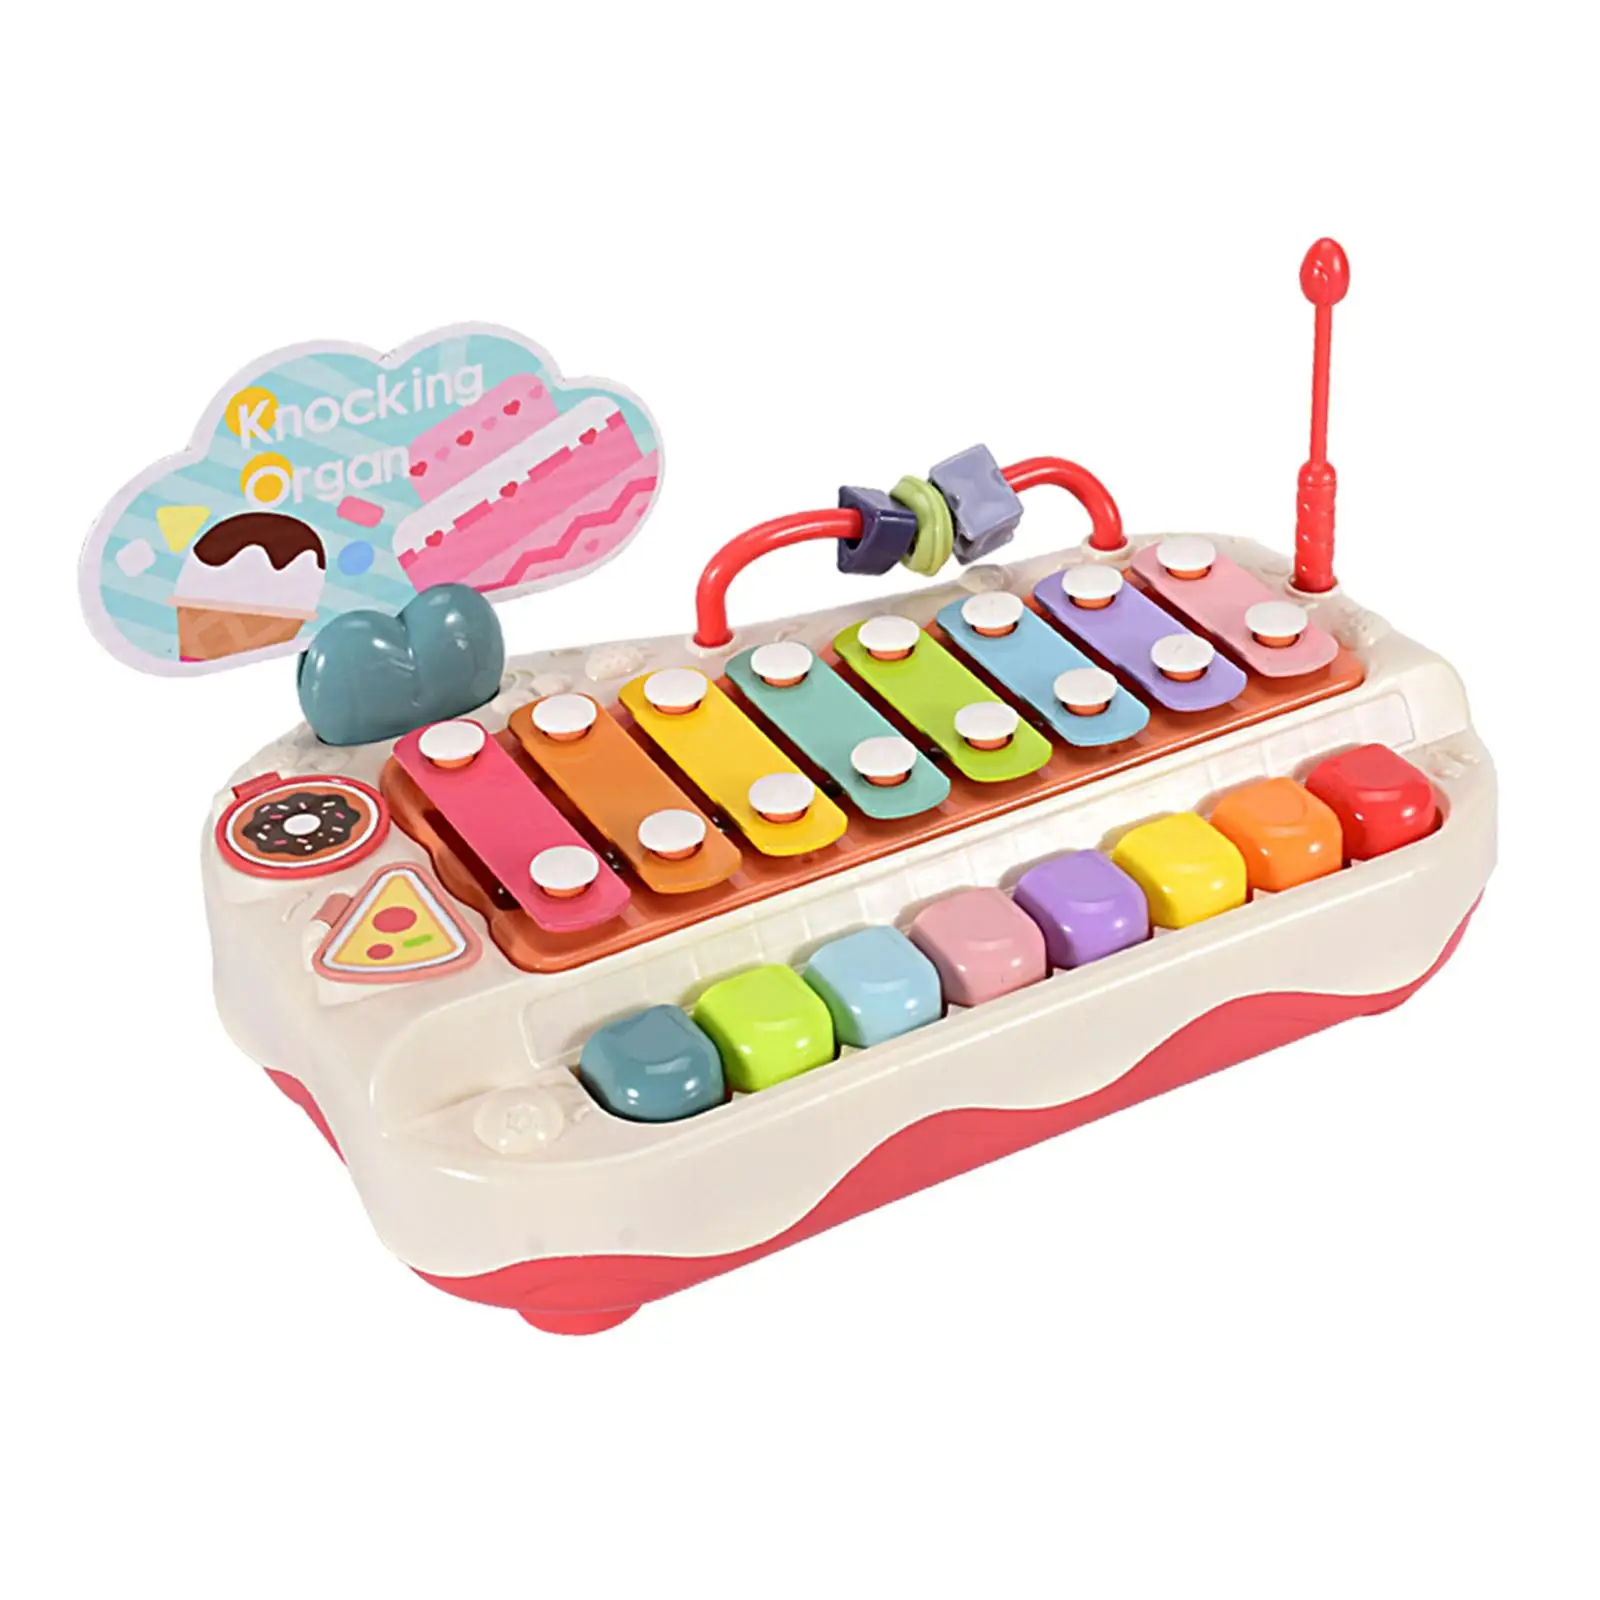 Musical Toy Multicolored Motor Skills Preschool Hand Knocking Piano for Boy Girls 1 2 3 Years Old Kids Toddler Holiday Gifts